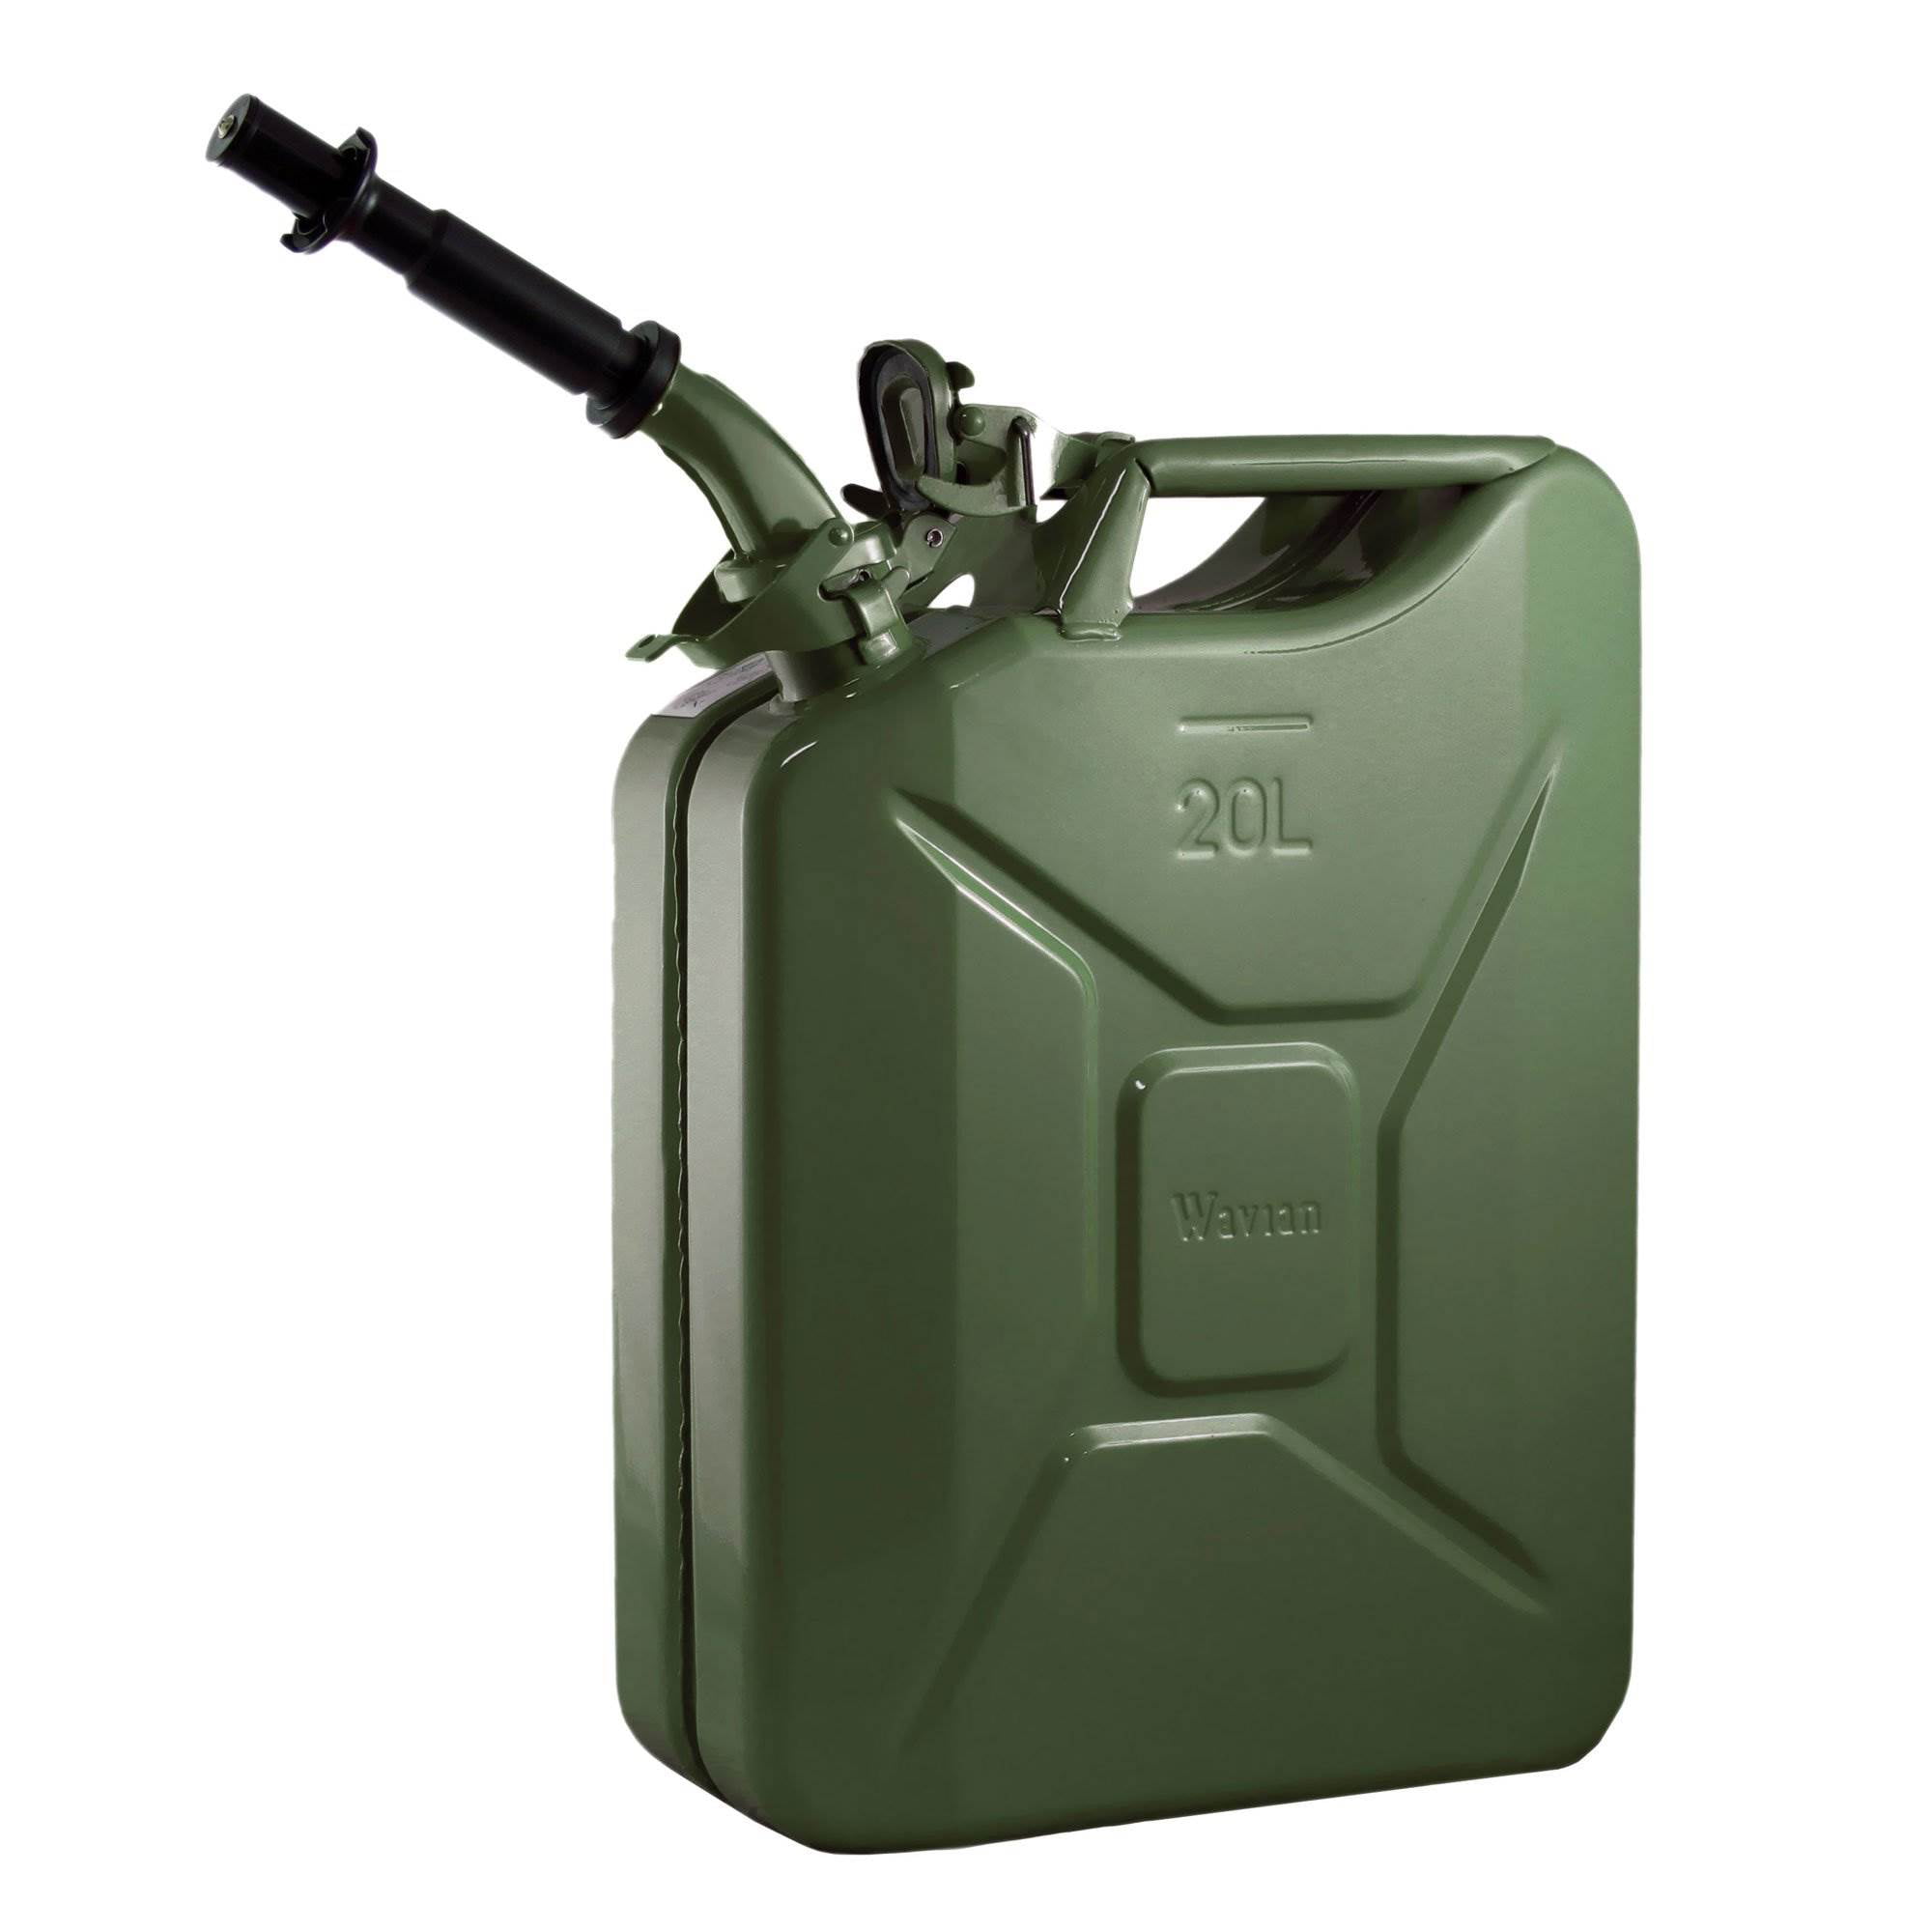 Wavian 3008 5.3 Gallon 20 Liter Authentic CARB Fuel Jerry Can w/ Spout Green 2 